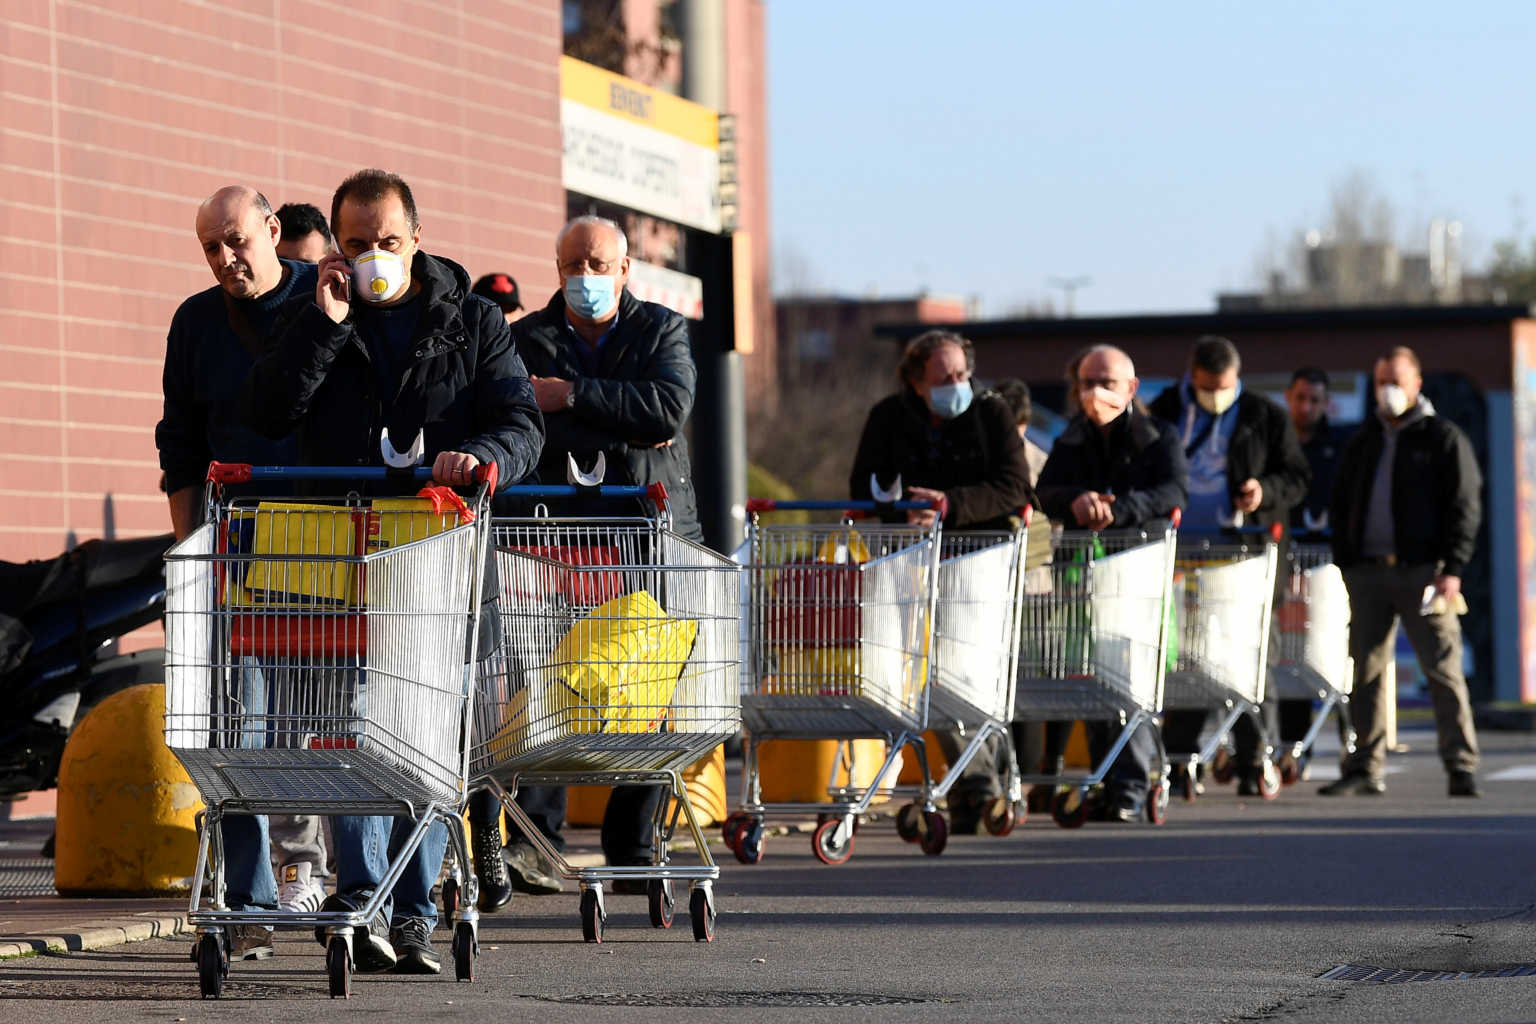 People wearing protective face masks arrive a supermarket on the second day of an unprecedented lockdown across all of the country, imposed to slow the outbreak of coronavirus, in Pioltello, near Milan, Italy March 11, 2020. REUTERS/Flavio Lo Scalzo